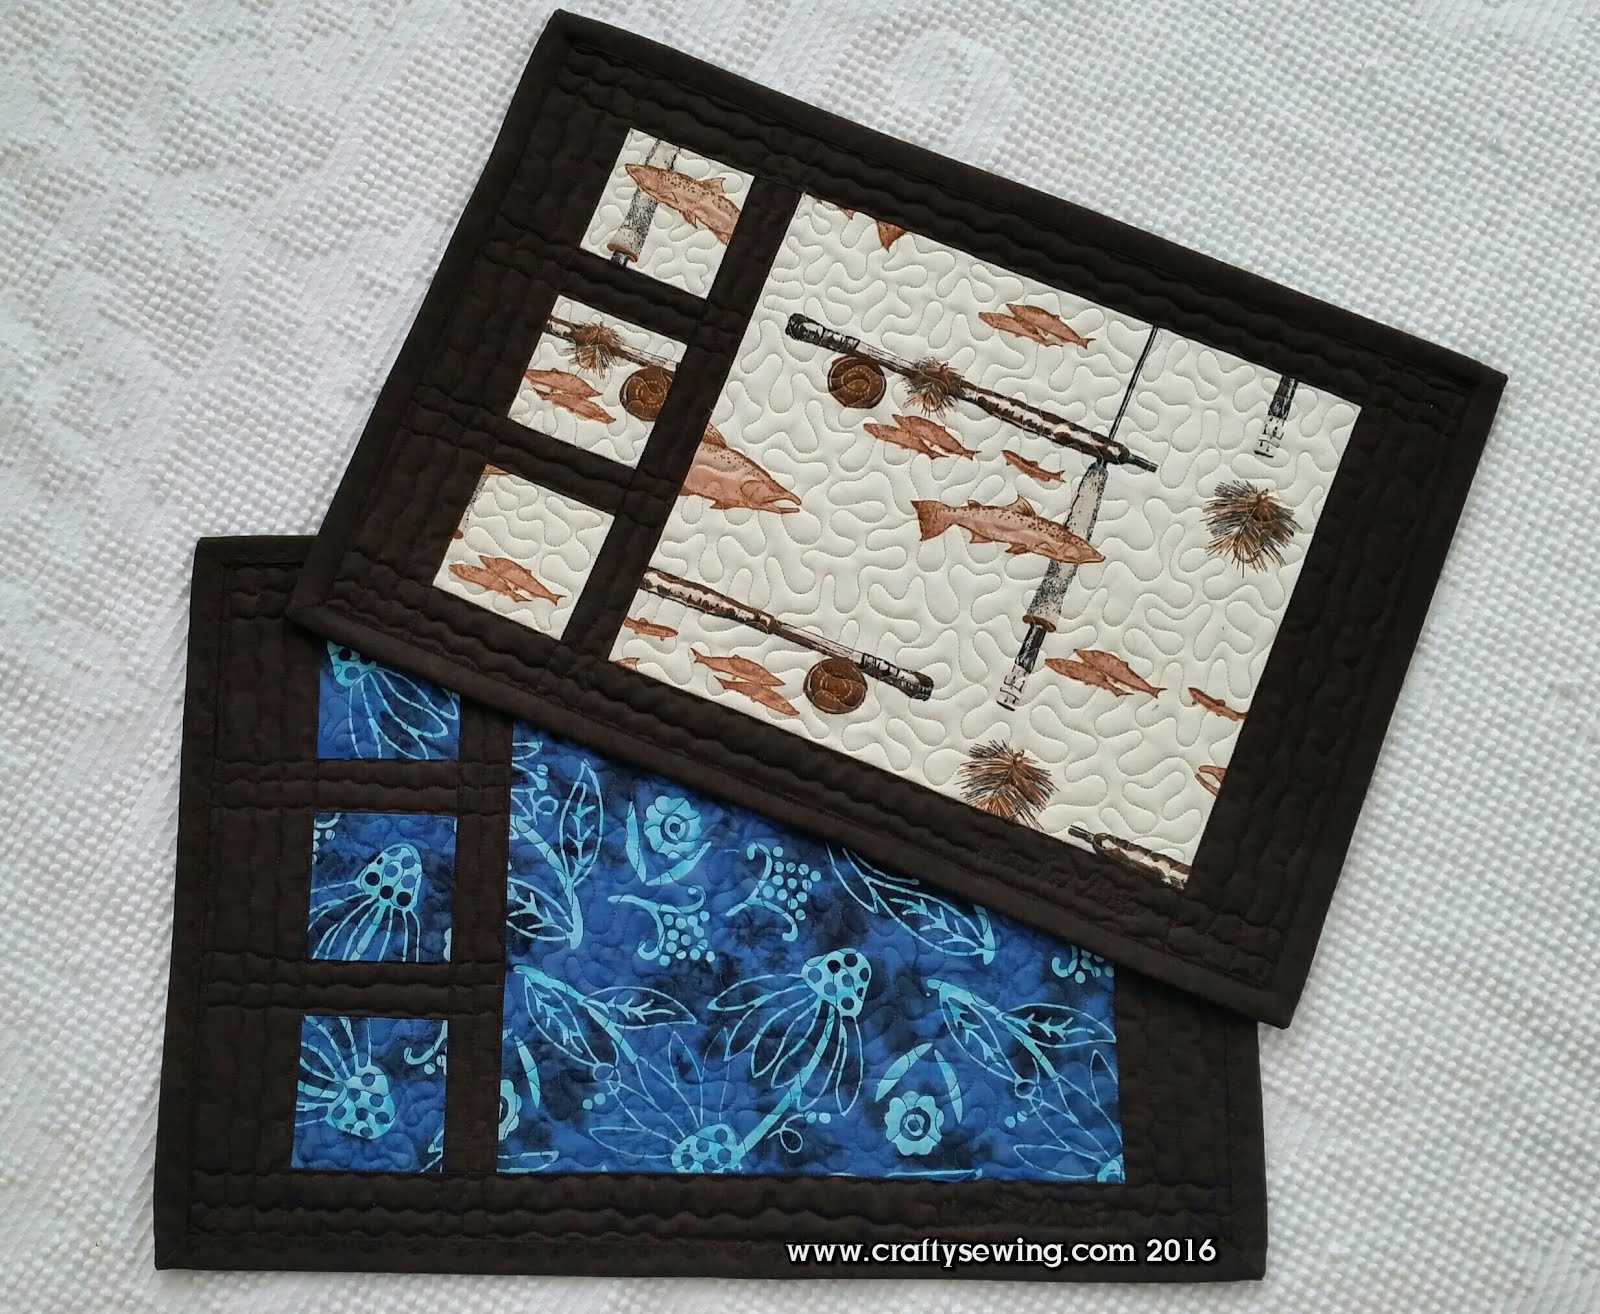 2016 Project Quilting Season 7 Challenge 2